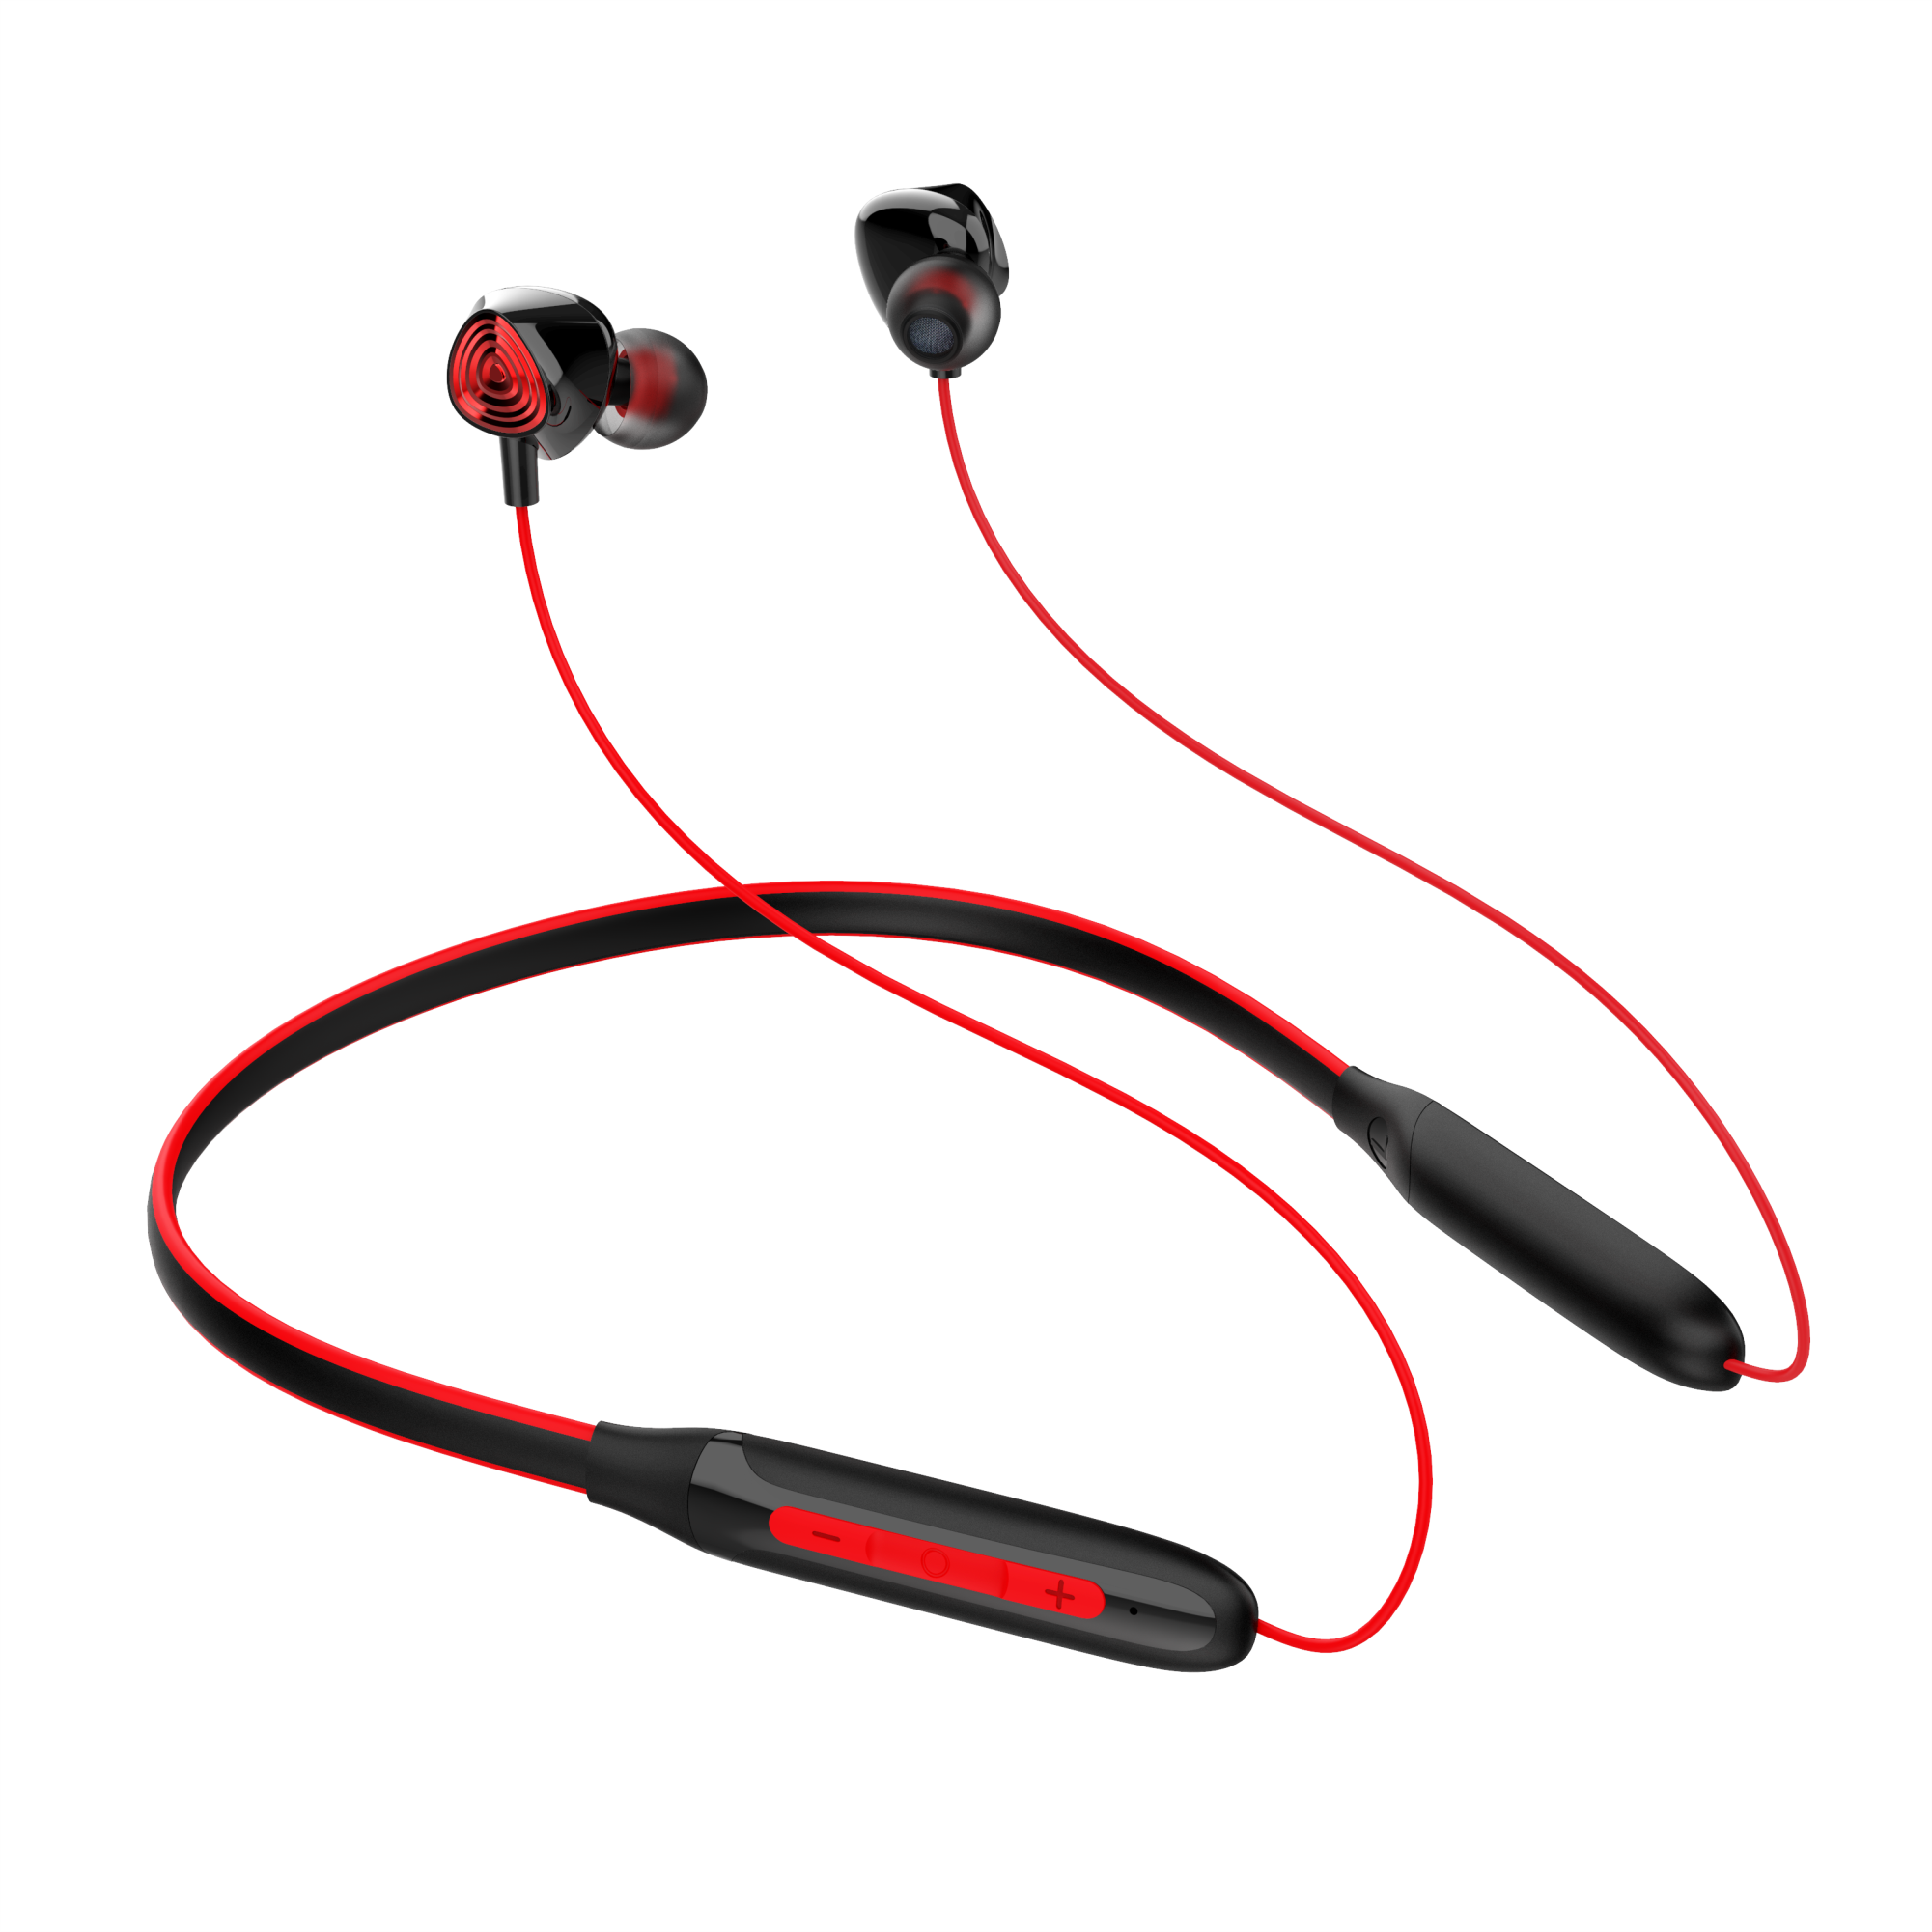 Zusix Bravo 295 with 18 Hours Music Time In-Ear Wireless Neckband v5.0 Bluetooth Headset